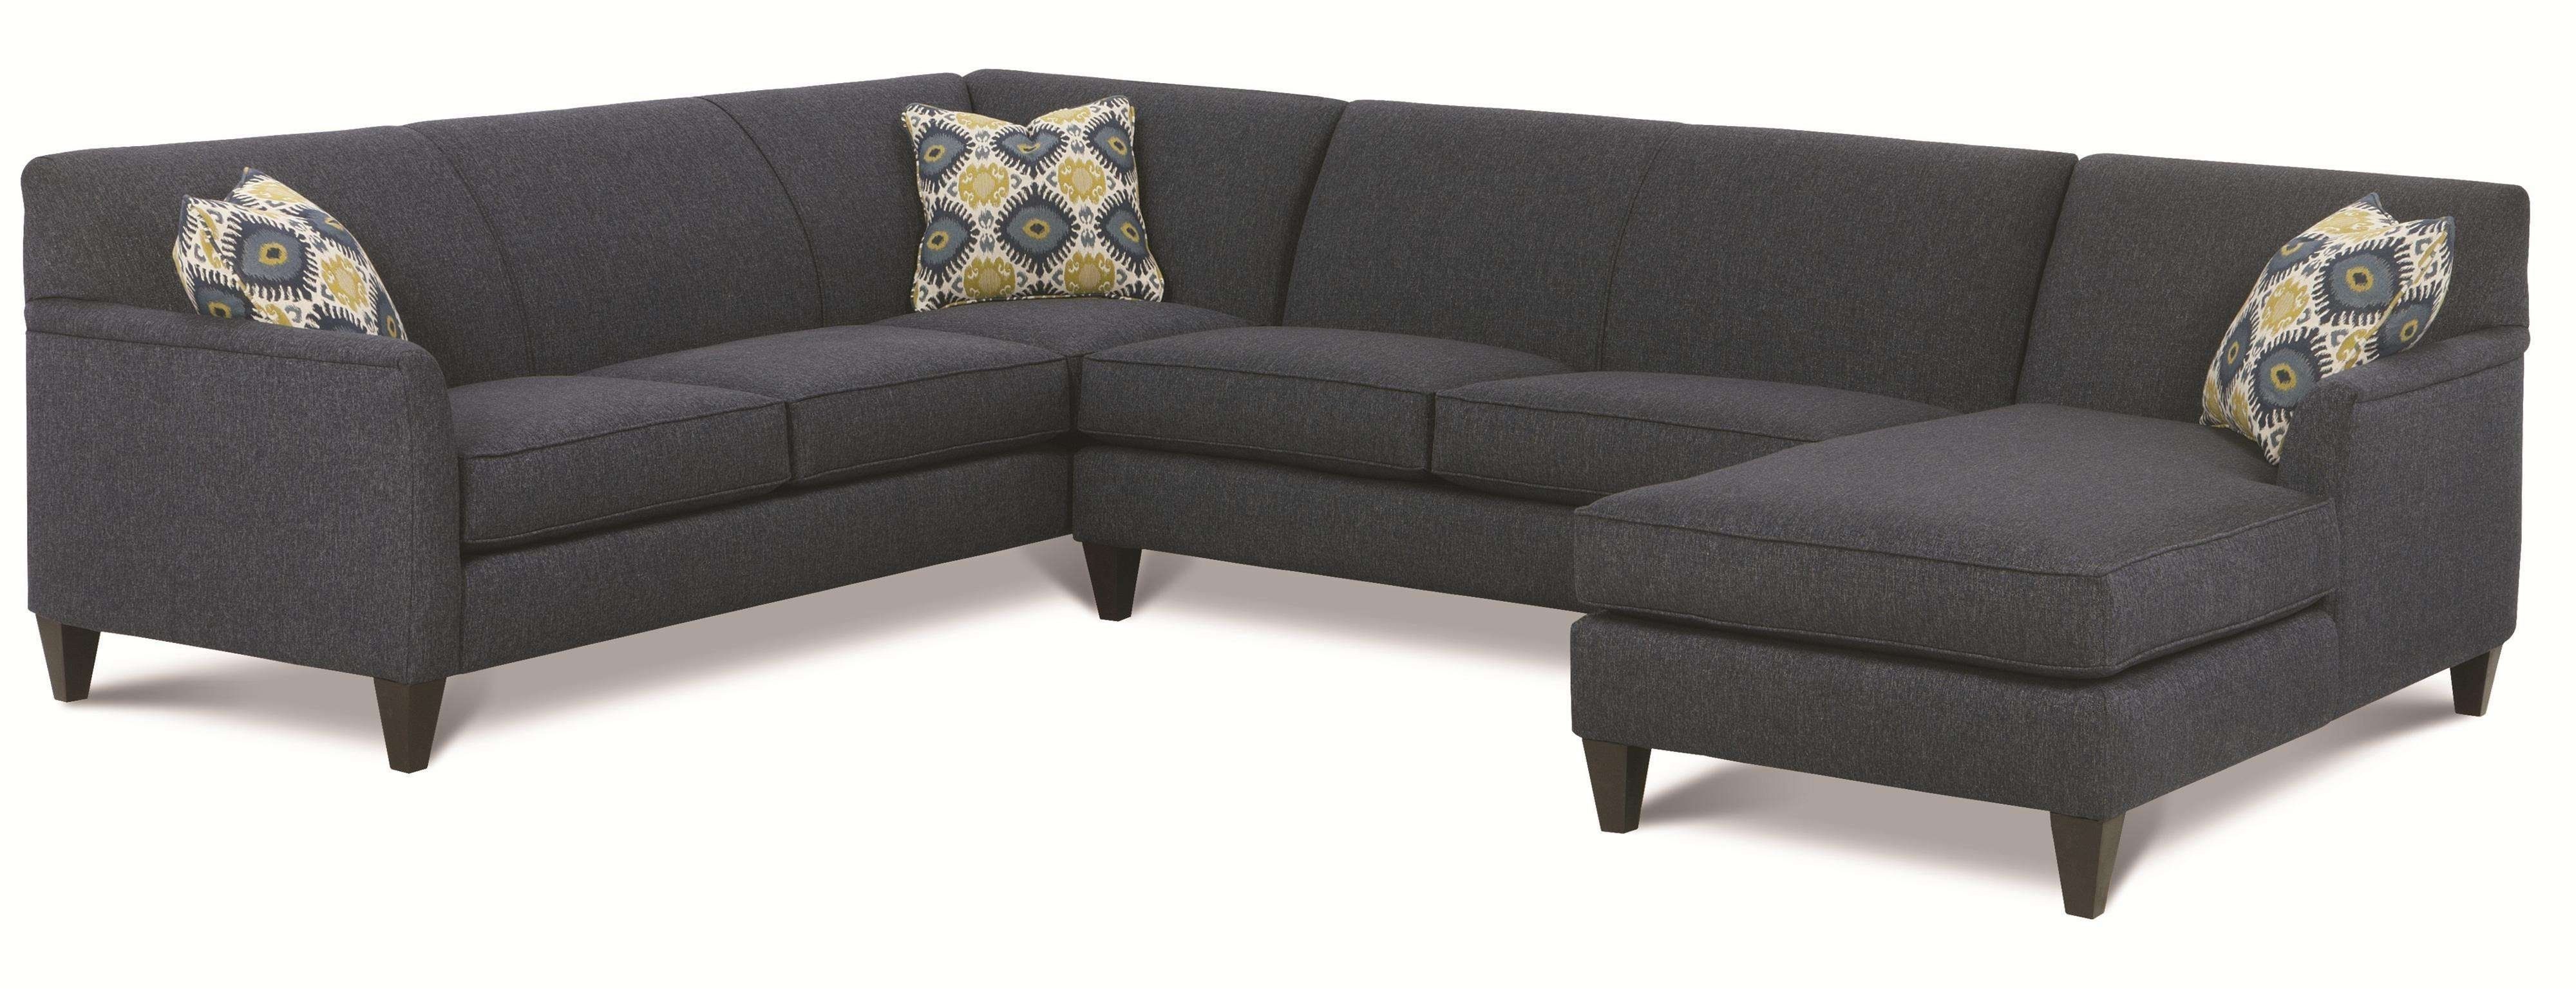 Simple 25 2 Piece Sectionals With Chaise Awesome | Russiandesignshow With Regard To Aquarius Dark Grey 2 Piece Sectionals With Laf Chaise (Photo 6 of 30)